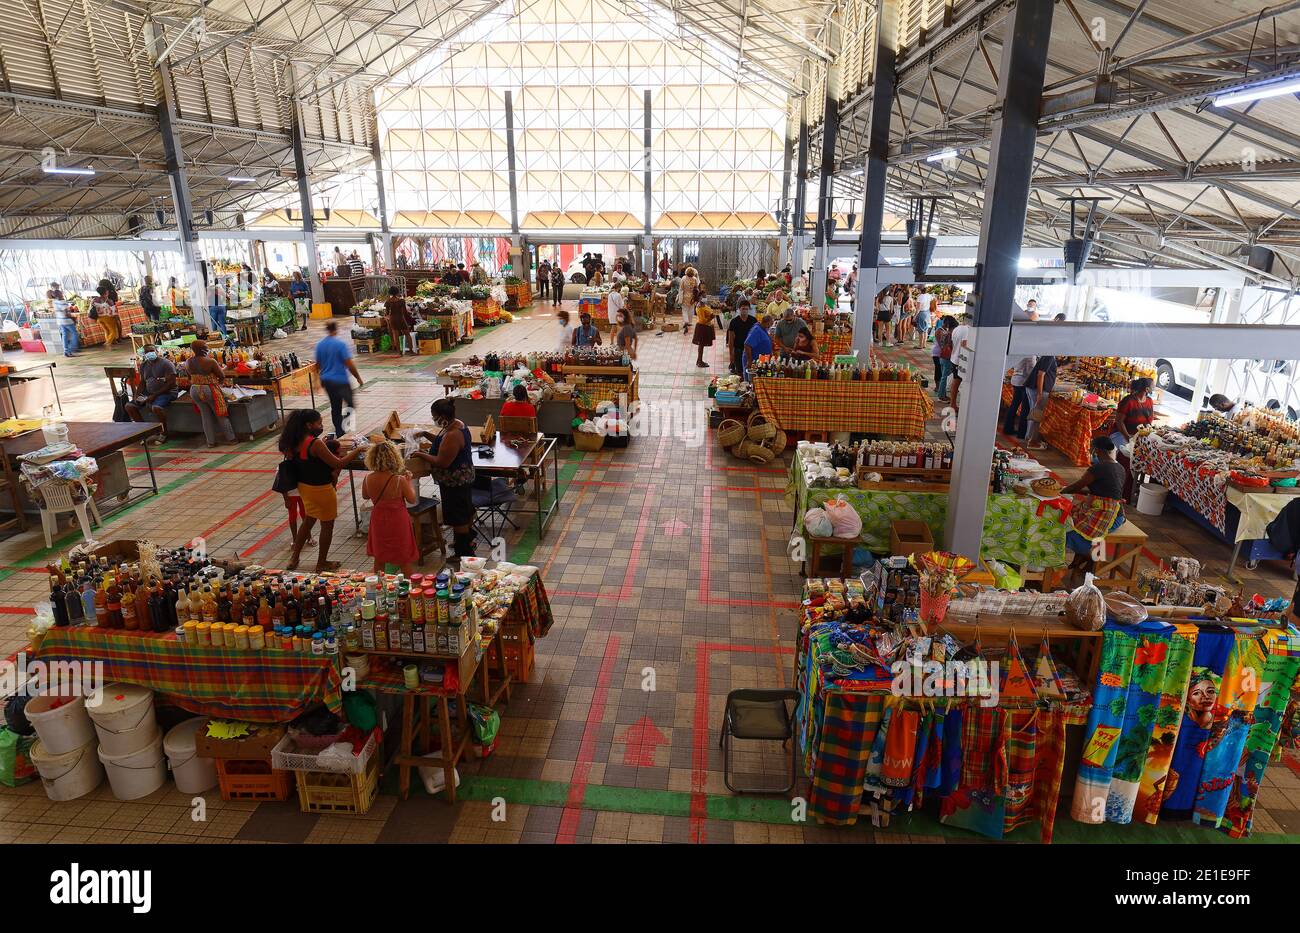 The picturesque covered market of Fort de France located in Fort de France centre, Martinique island, Lesser Antilles. Stock Photo